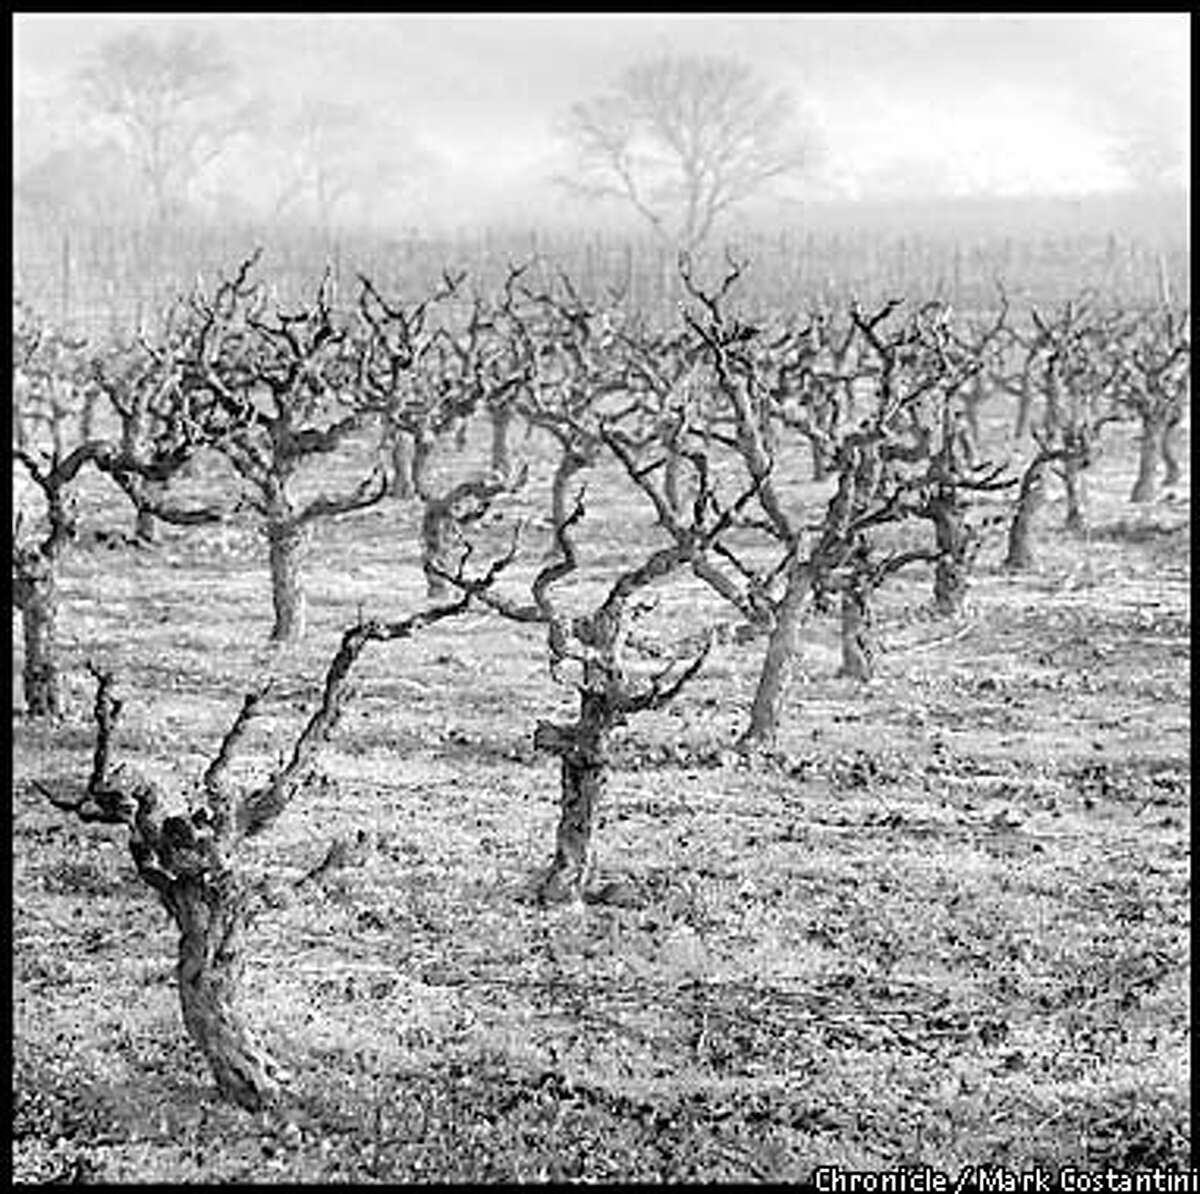 OLDVINEZIN17c-B-03JAN01-FD-MC. Old vine zinfandel vines at the Valley of The Moon winery in Sonoma County. Photo: Mark Costantini/The Chronicle